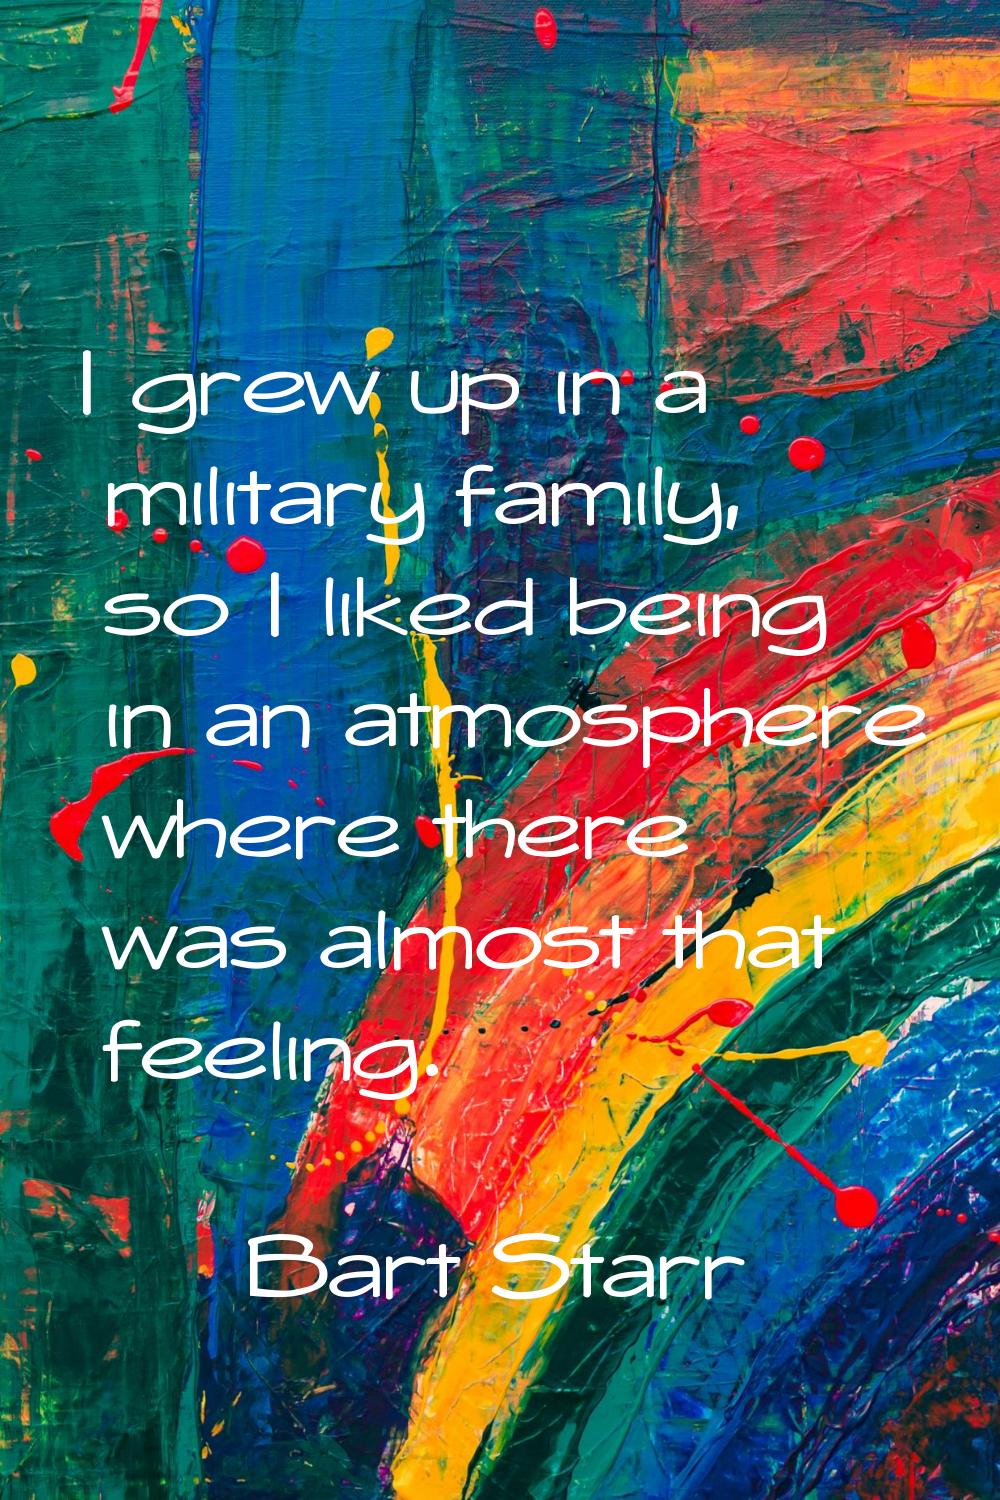 I grew up in a military family, so I liked being in an atmosphere where there was almost that feeli